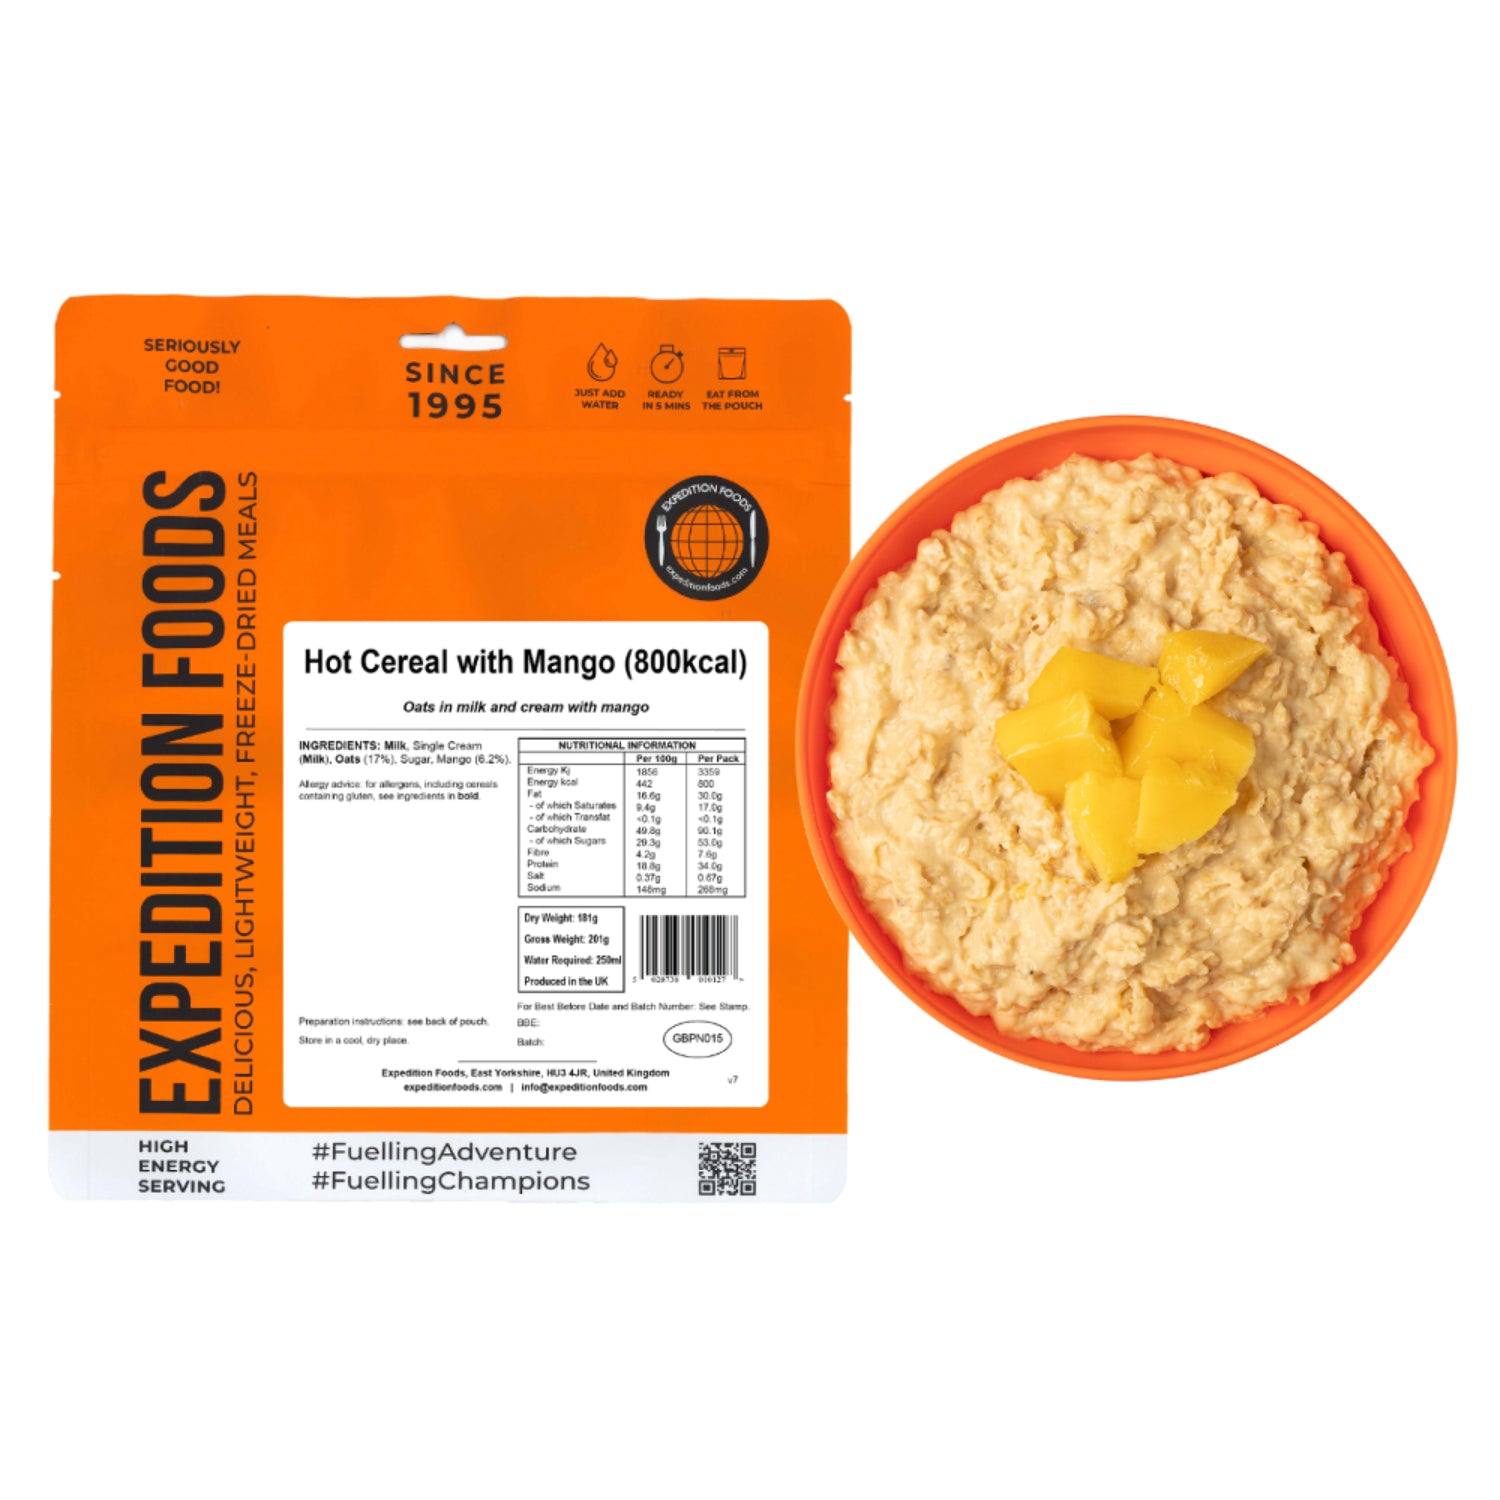 Expedition Foods Hot Cereal with Mango (800kcal) pack